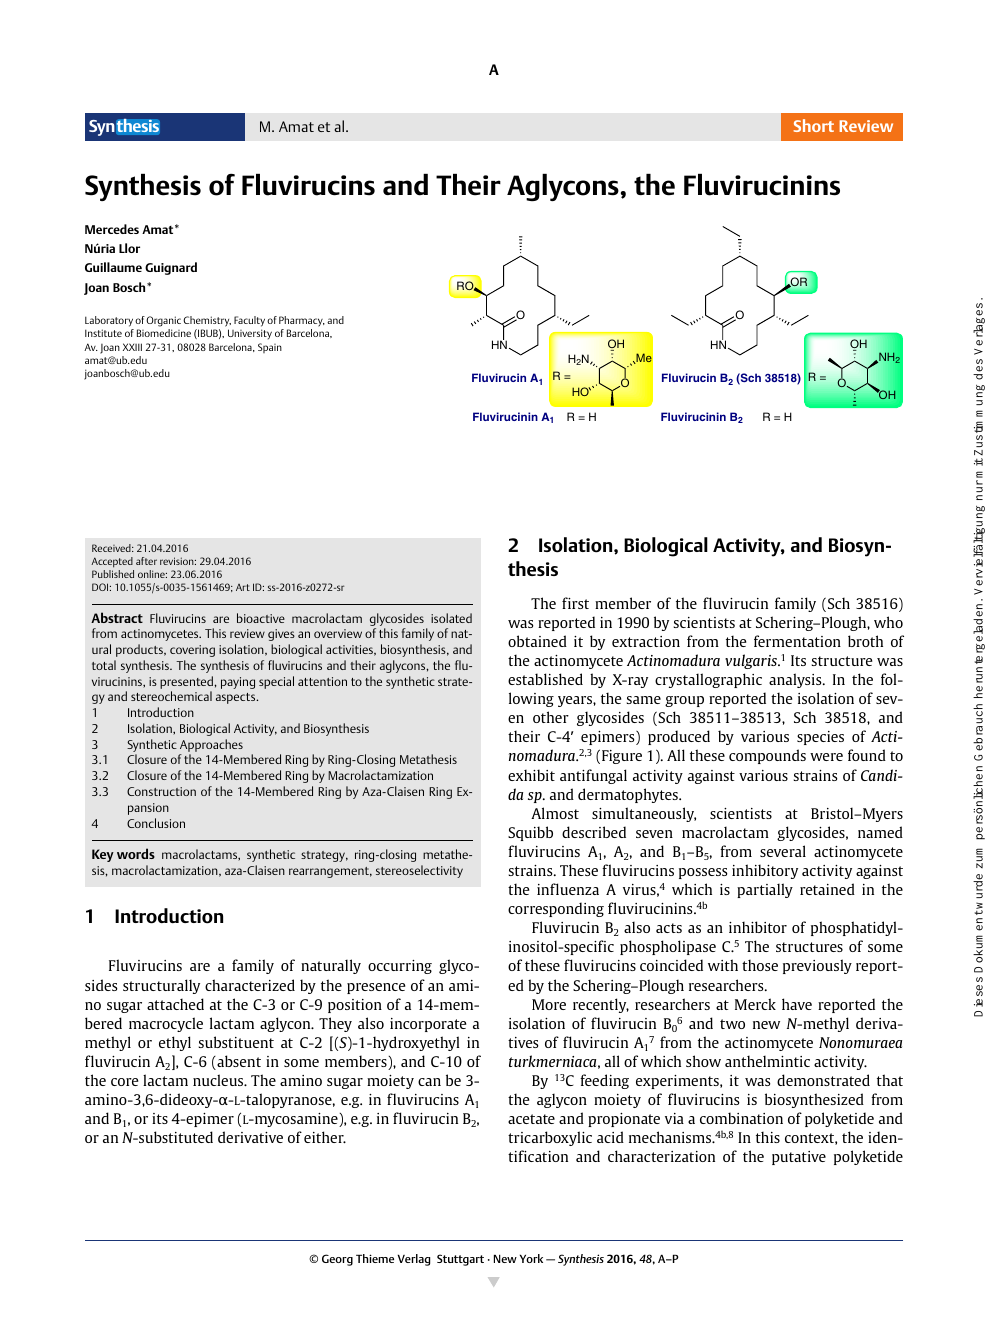 Synthesis of Fluvirucins and Their Aglycons, the Fluvirucinins – topic of  research paper in Chemical sciences. Download scholarly article PDF and  read for free on CyberLeninka open science hub.